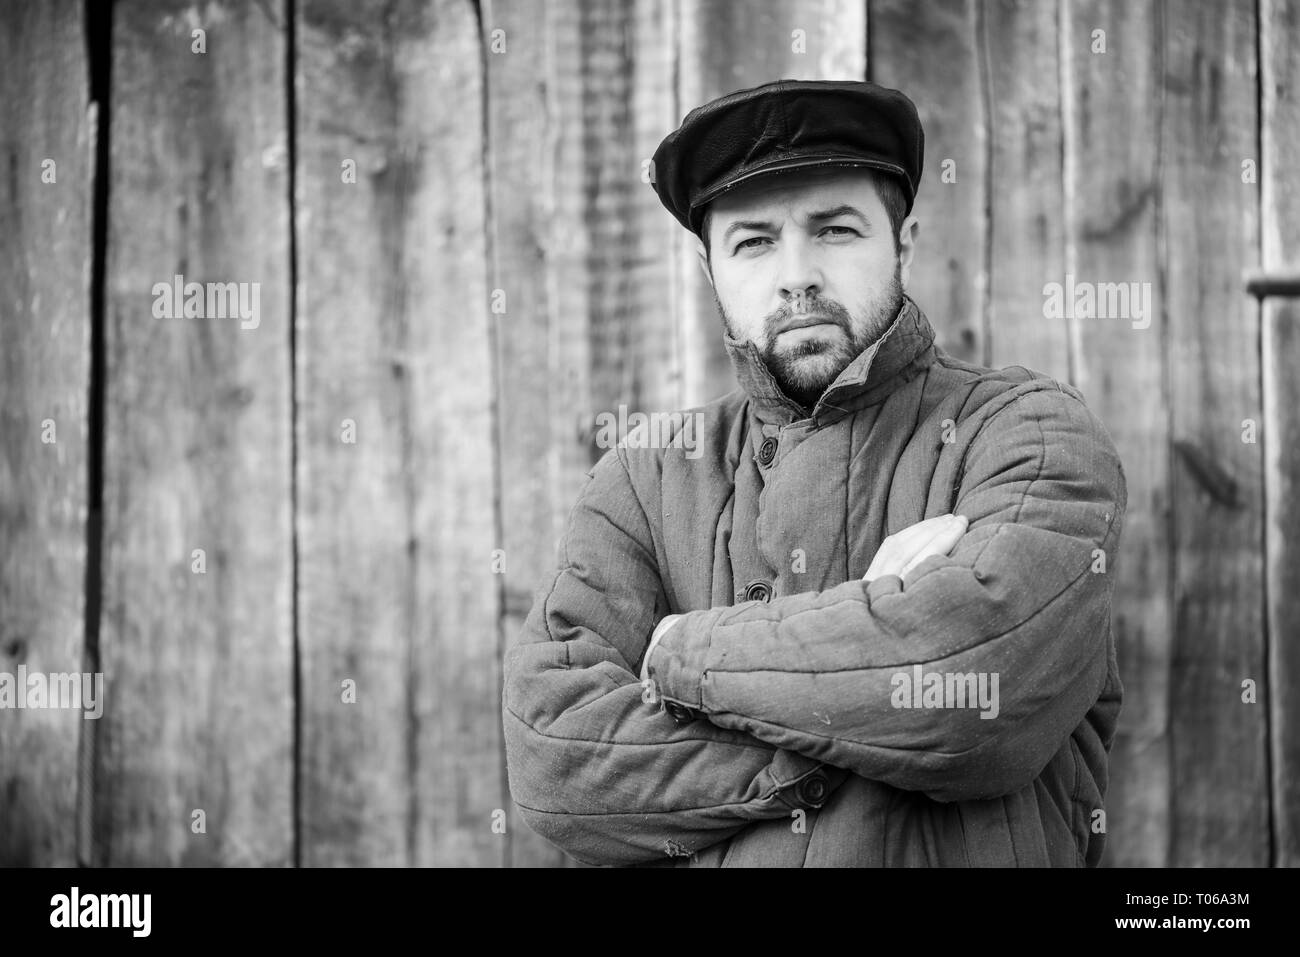 Monochrome Portrait Of Bearded Men In Old Fashioned Clothes Caucasian Man 35 Years Old Old